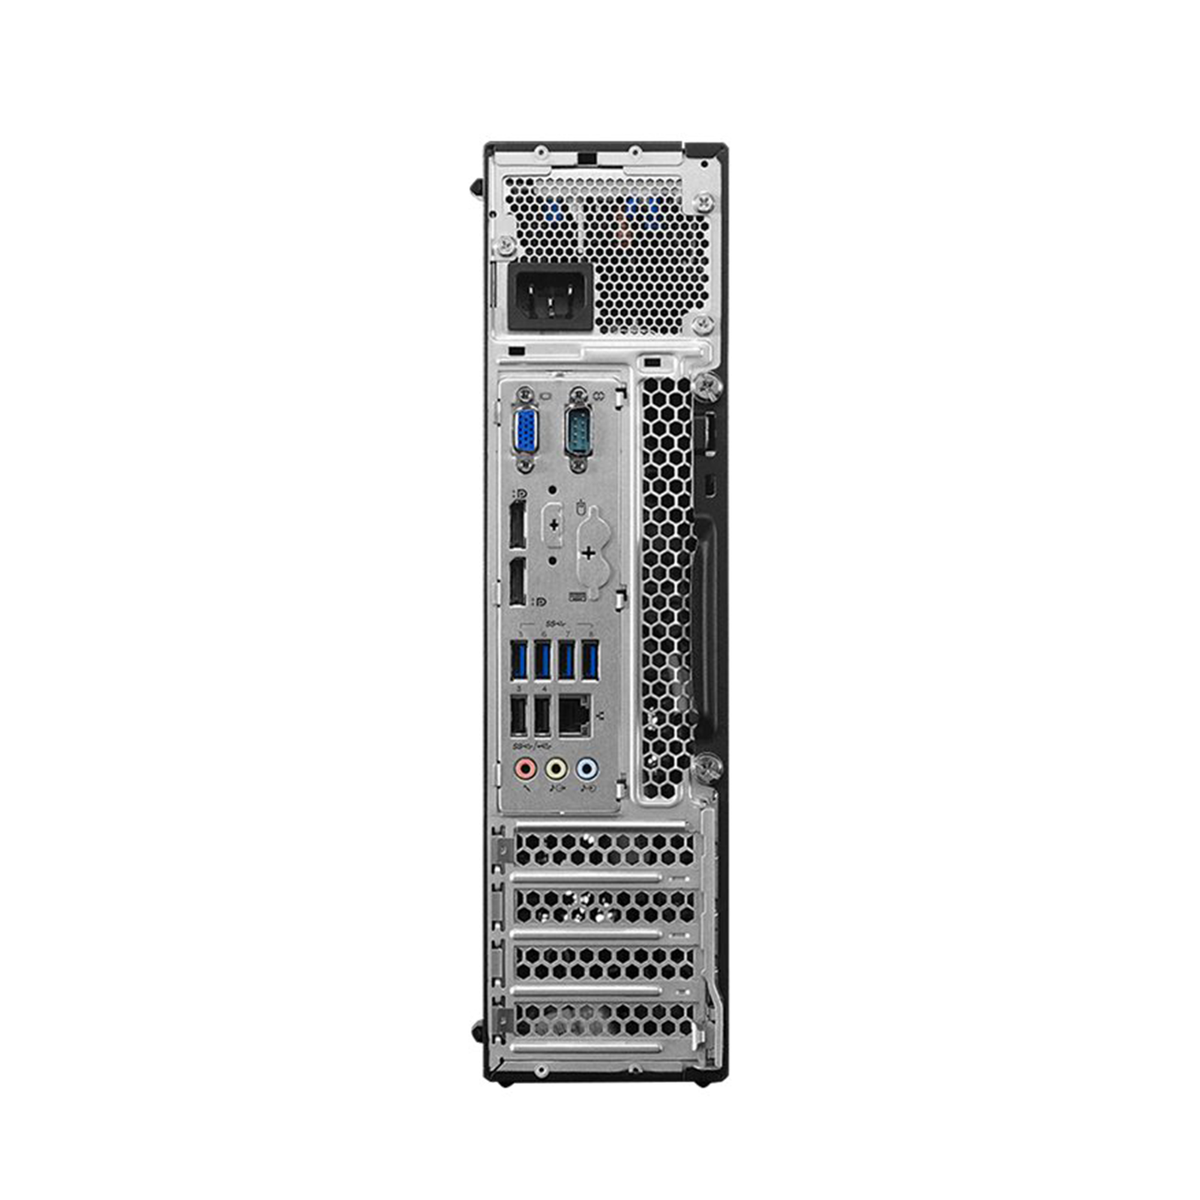 Discount PC - back-facing view of the Lenovo ThinkCentre M900 i5 Small Form Factor desktop